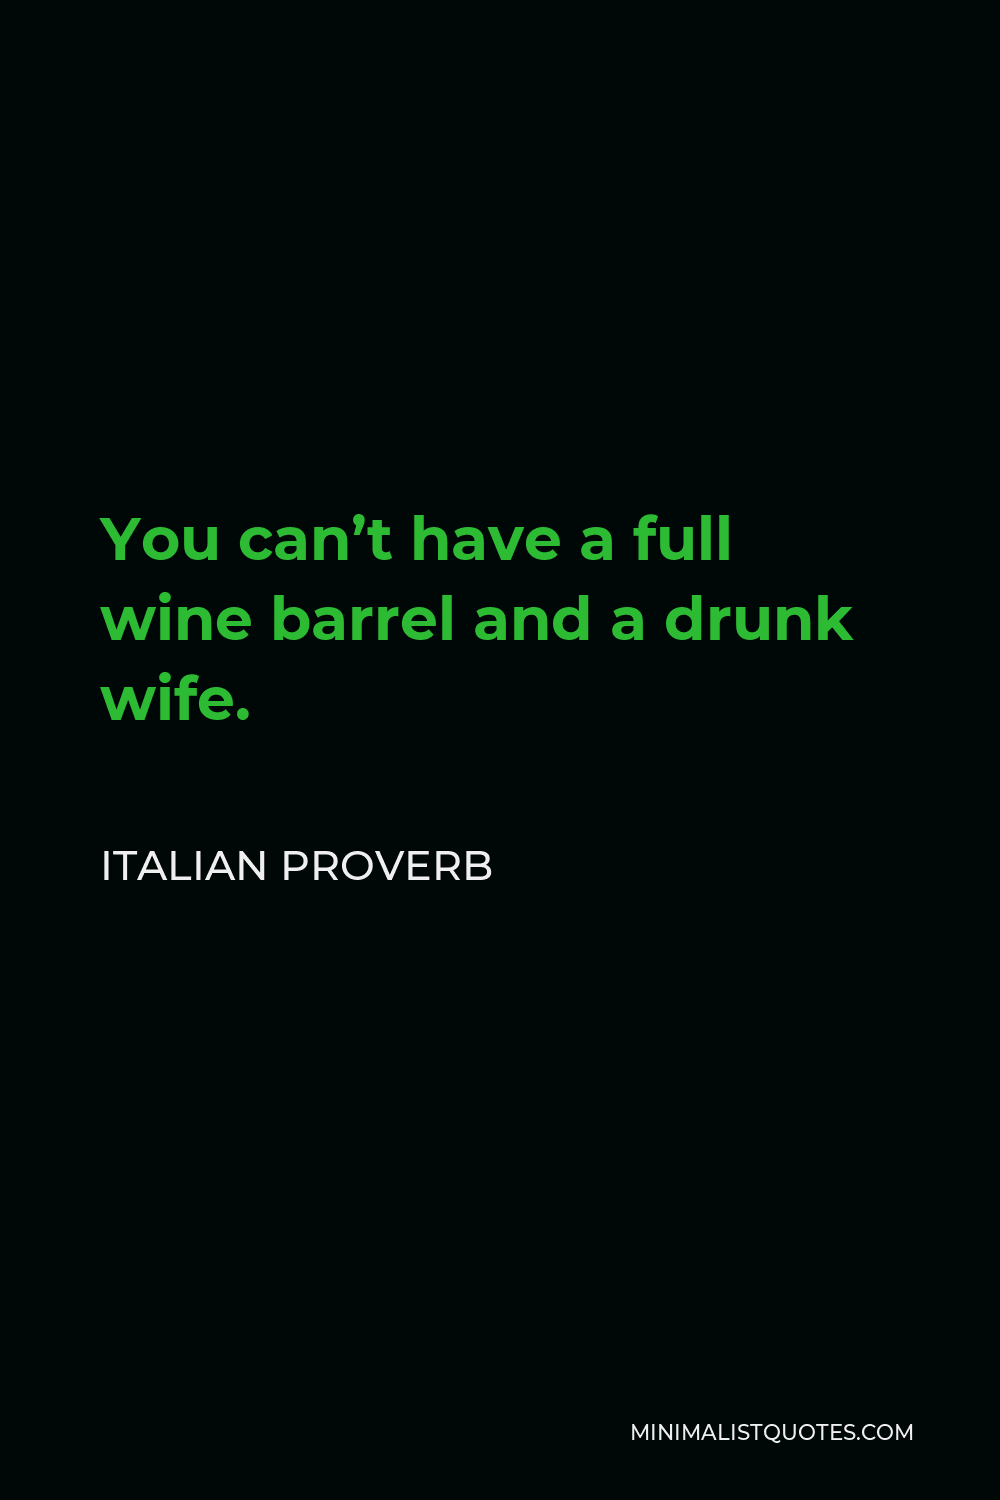 Italian Proverb Quote - You can’t have a full wine barrel and a drunk wife.